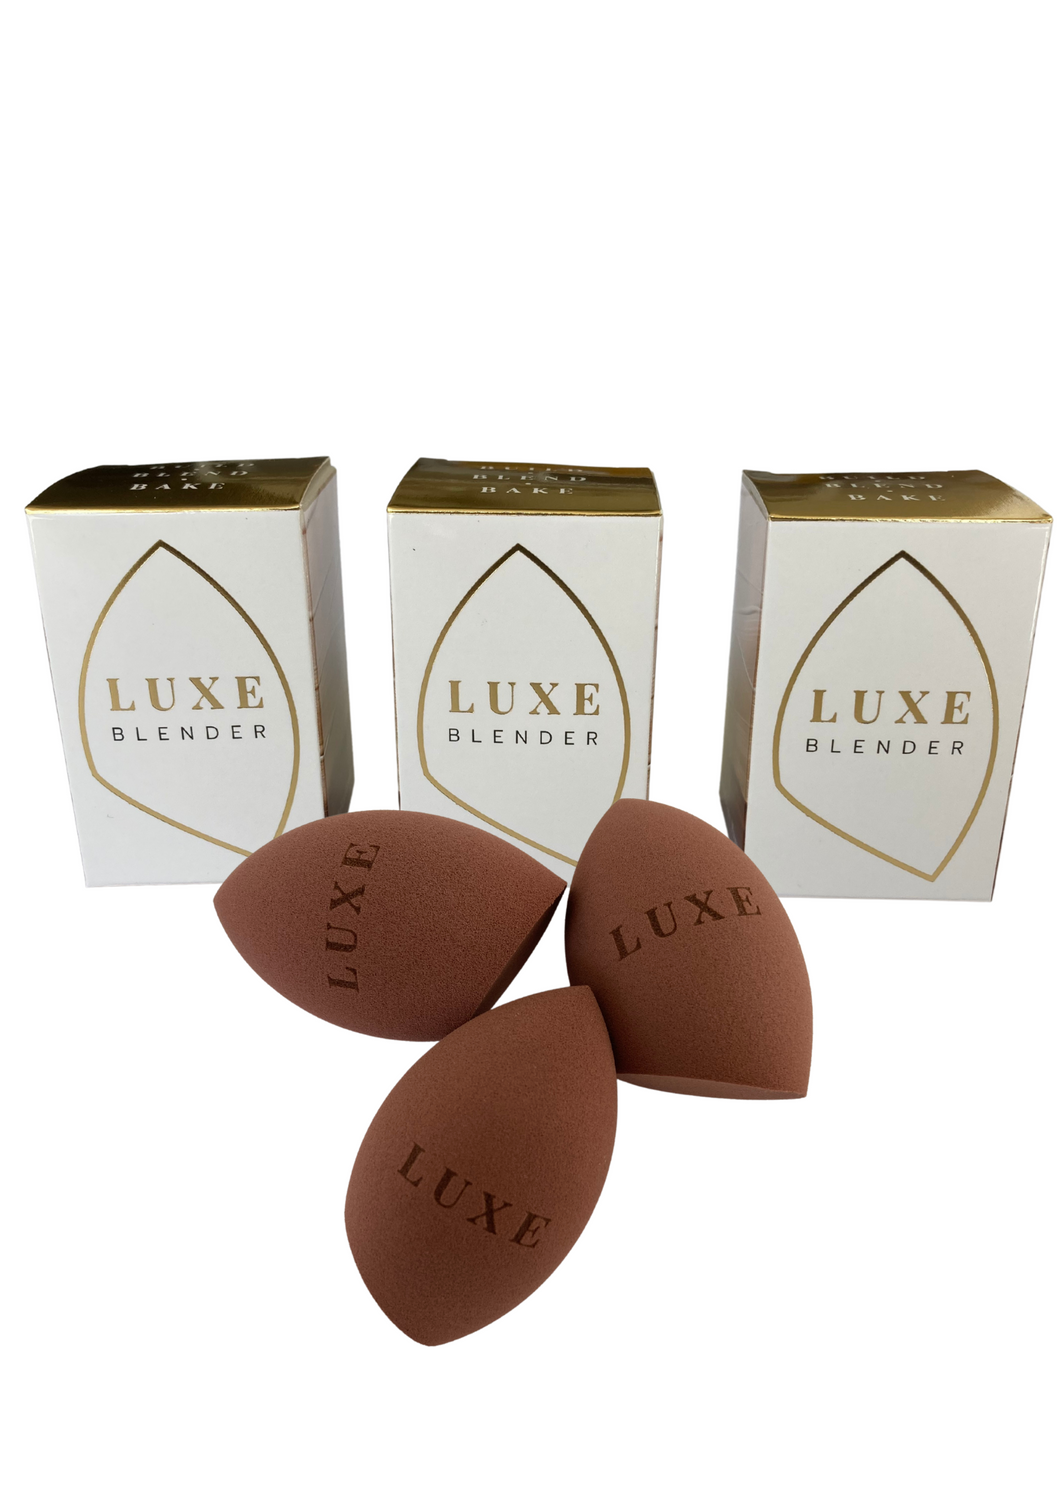 Luxe Blender Sponges trio (with Free Holder)